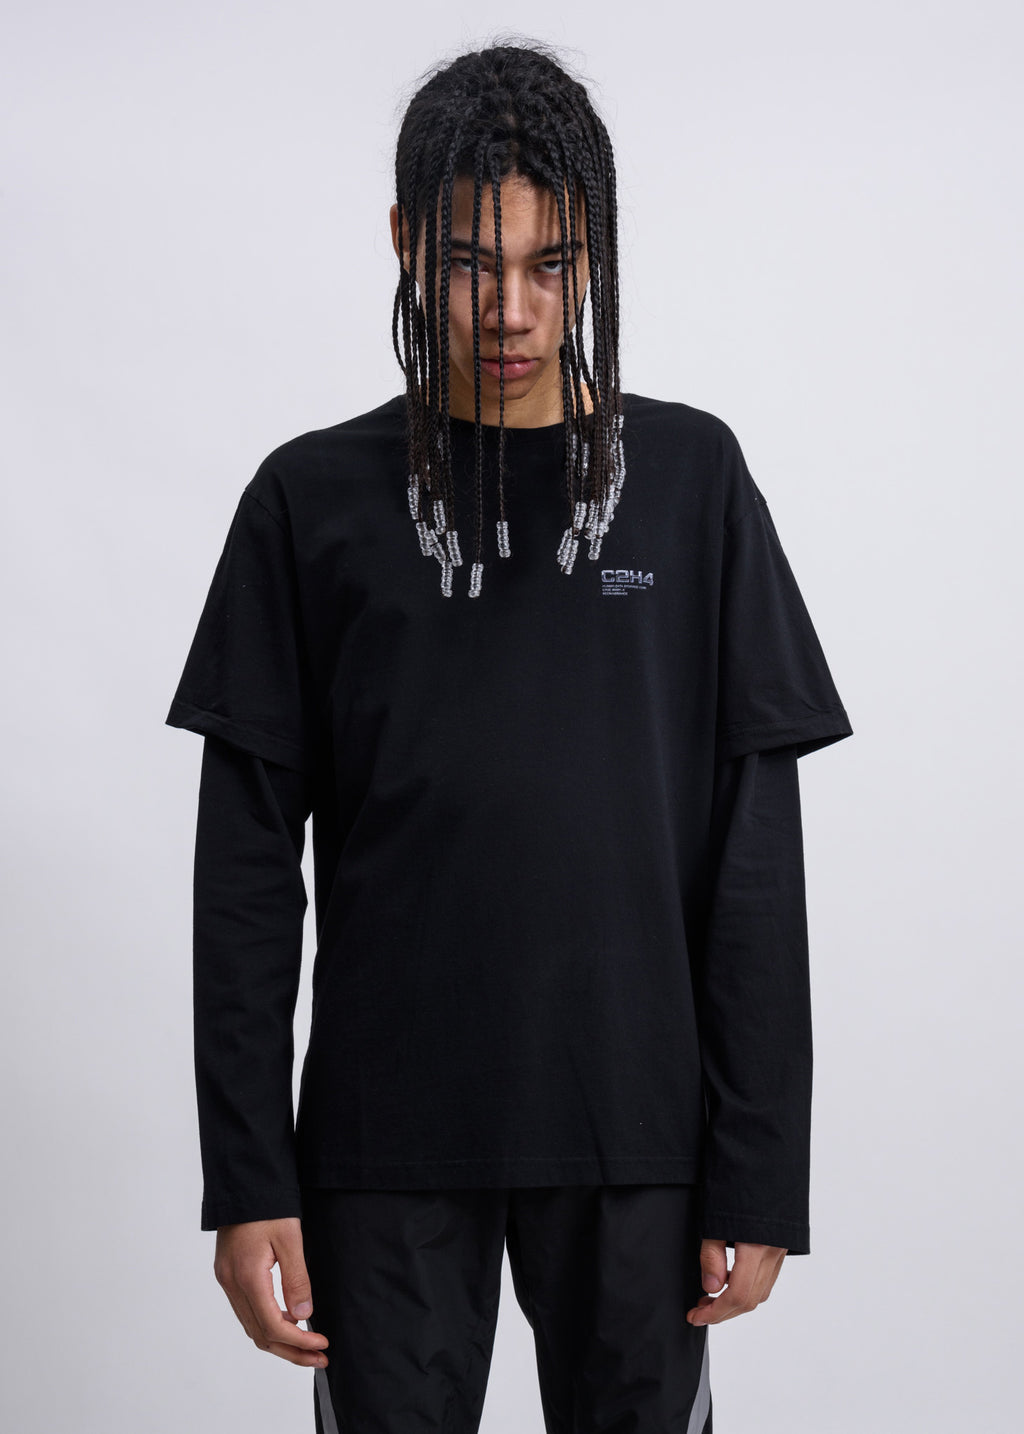 017 Shop | C2H4 Black Double Layered Long Sleeves